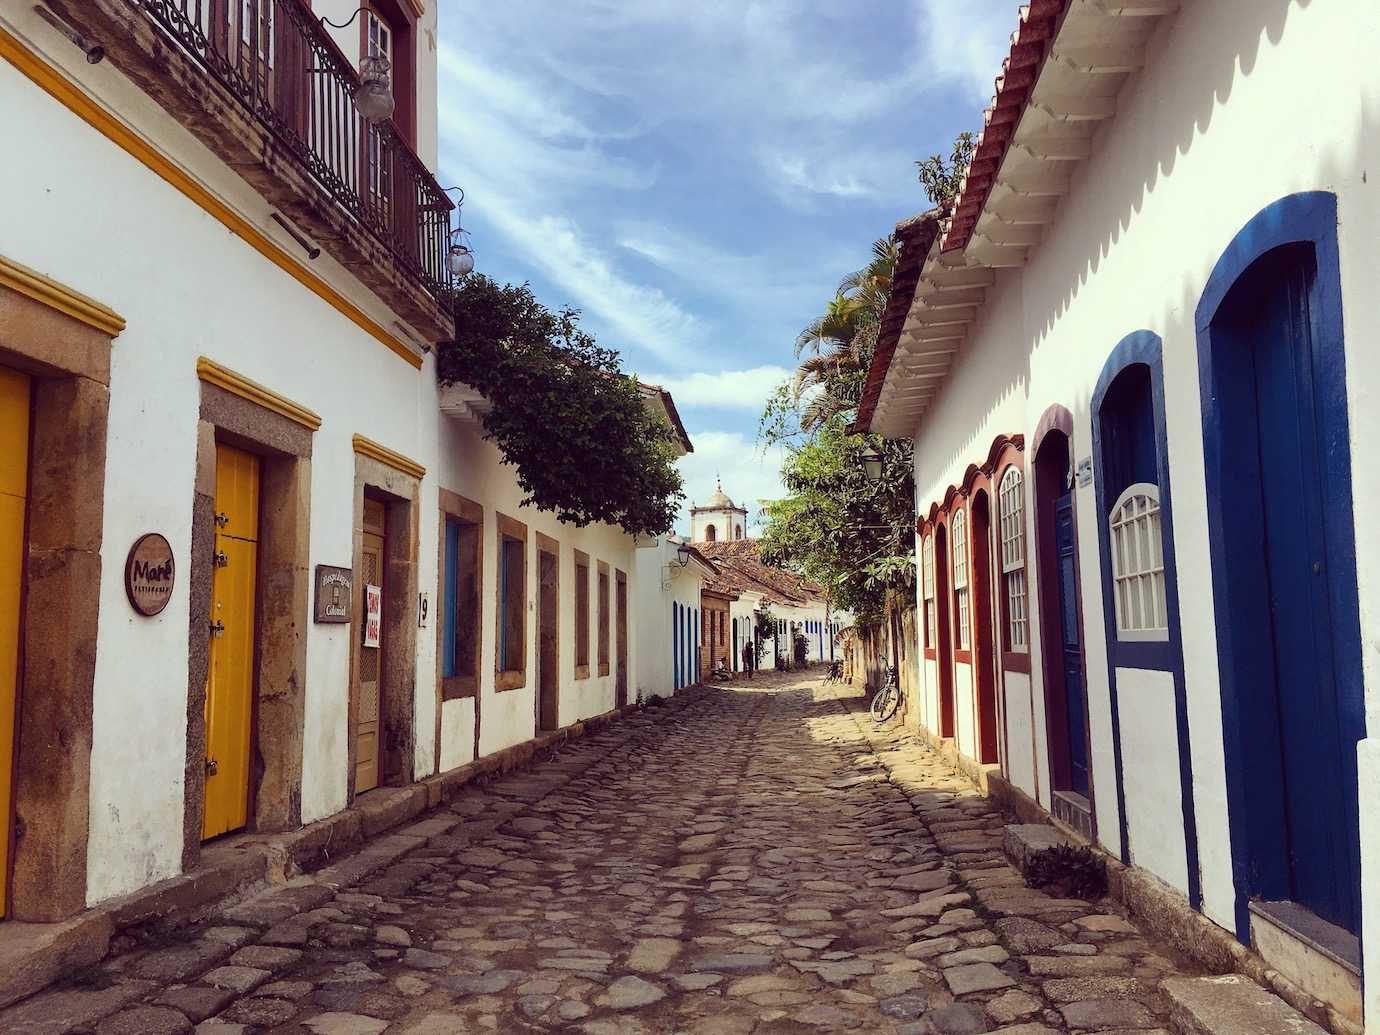 A short stay in Paraty. Historic colonial centre cobbled streets